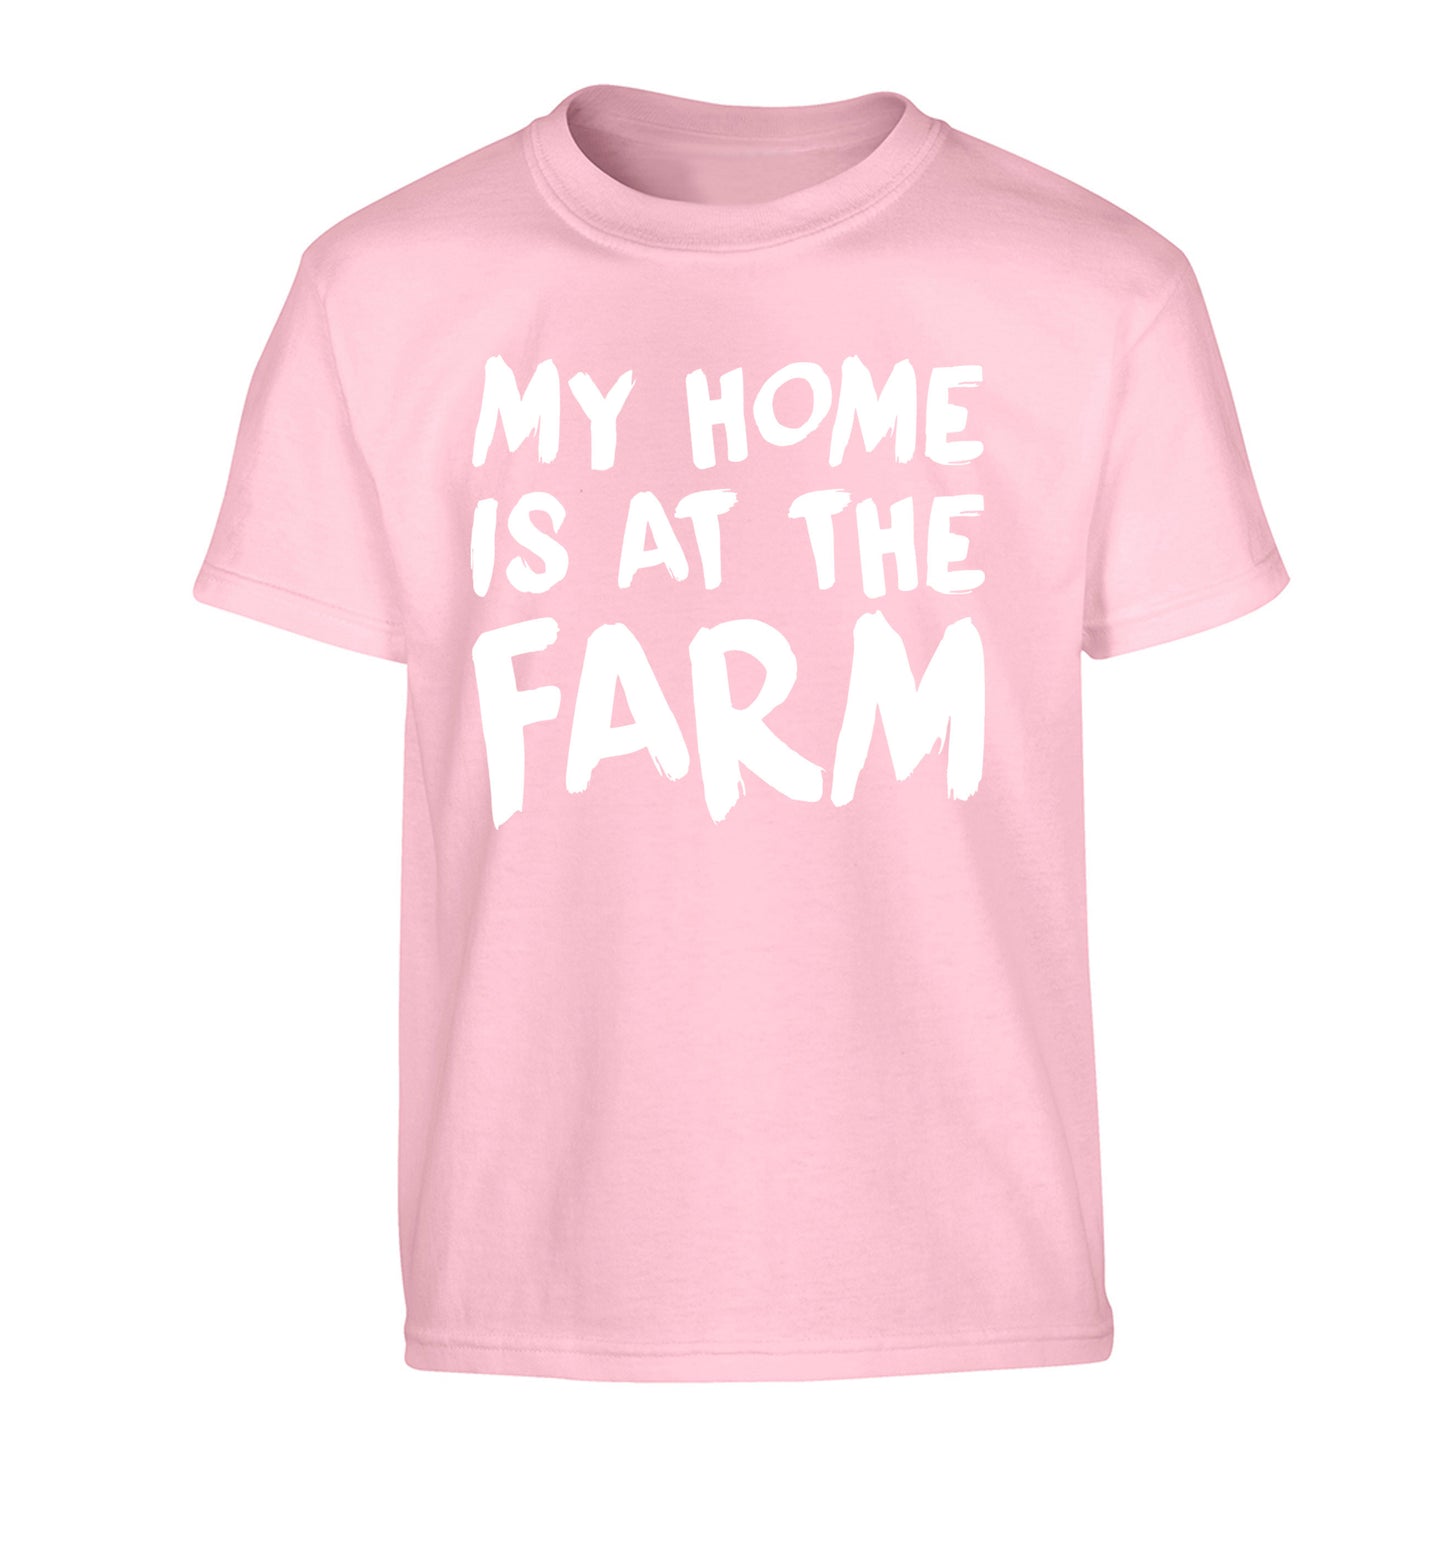 My home is at the farm Children's light pink Tshirt 12-14 Years